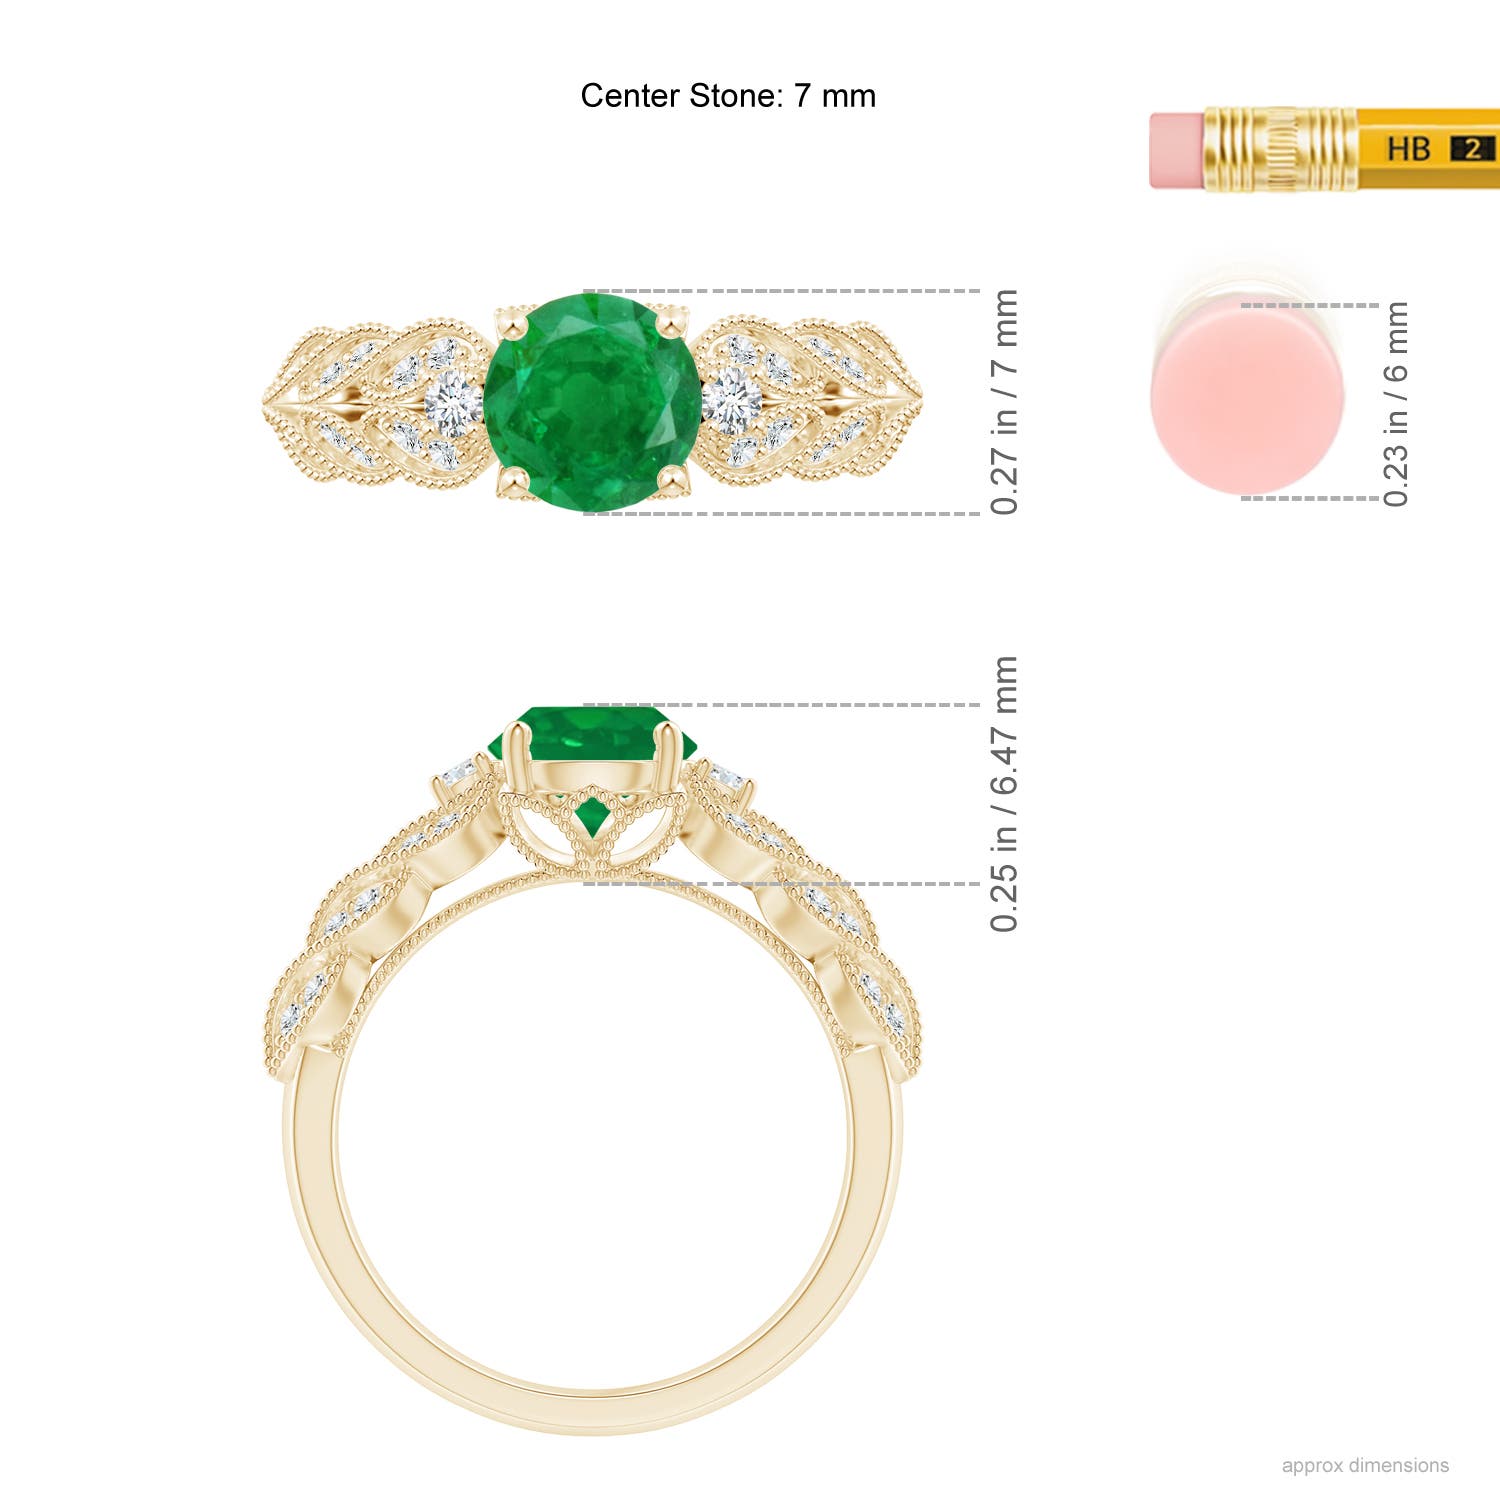 AA - Emerald / 1.47 CT / 14 KT Yellow Gold